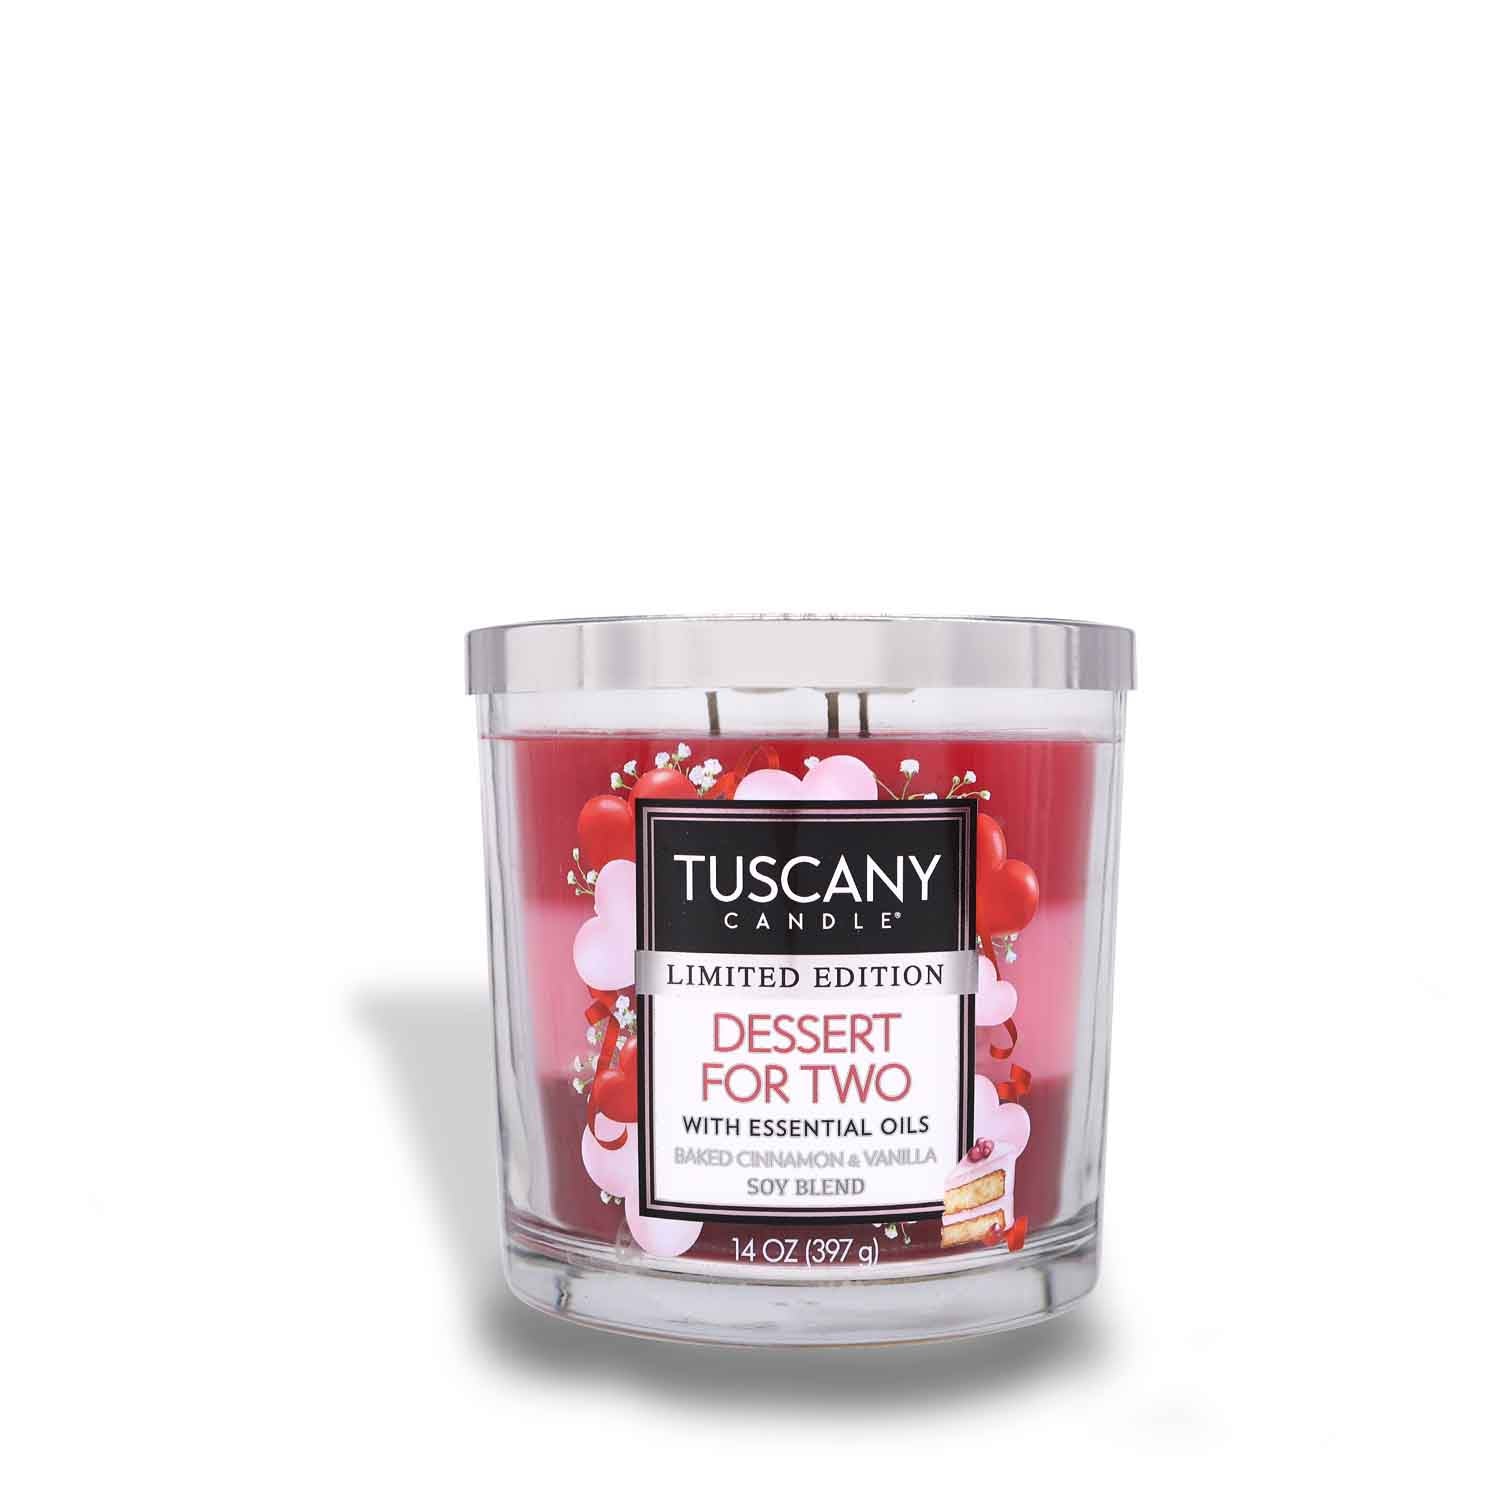 A Dessert For Two Long-Lasting Scented Jar Candle (14 oz) by Tuscany Candle®, perfect for creating a warm and inviting atmosphere.